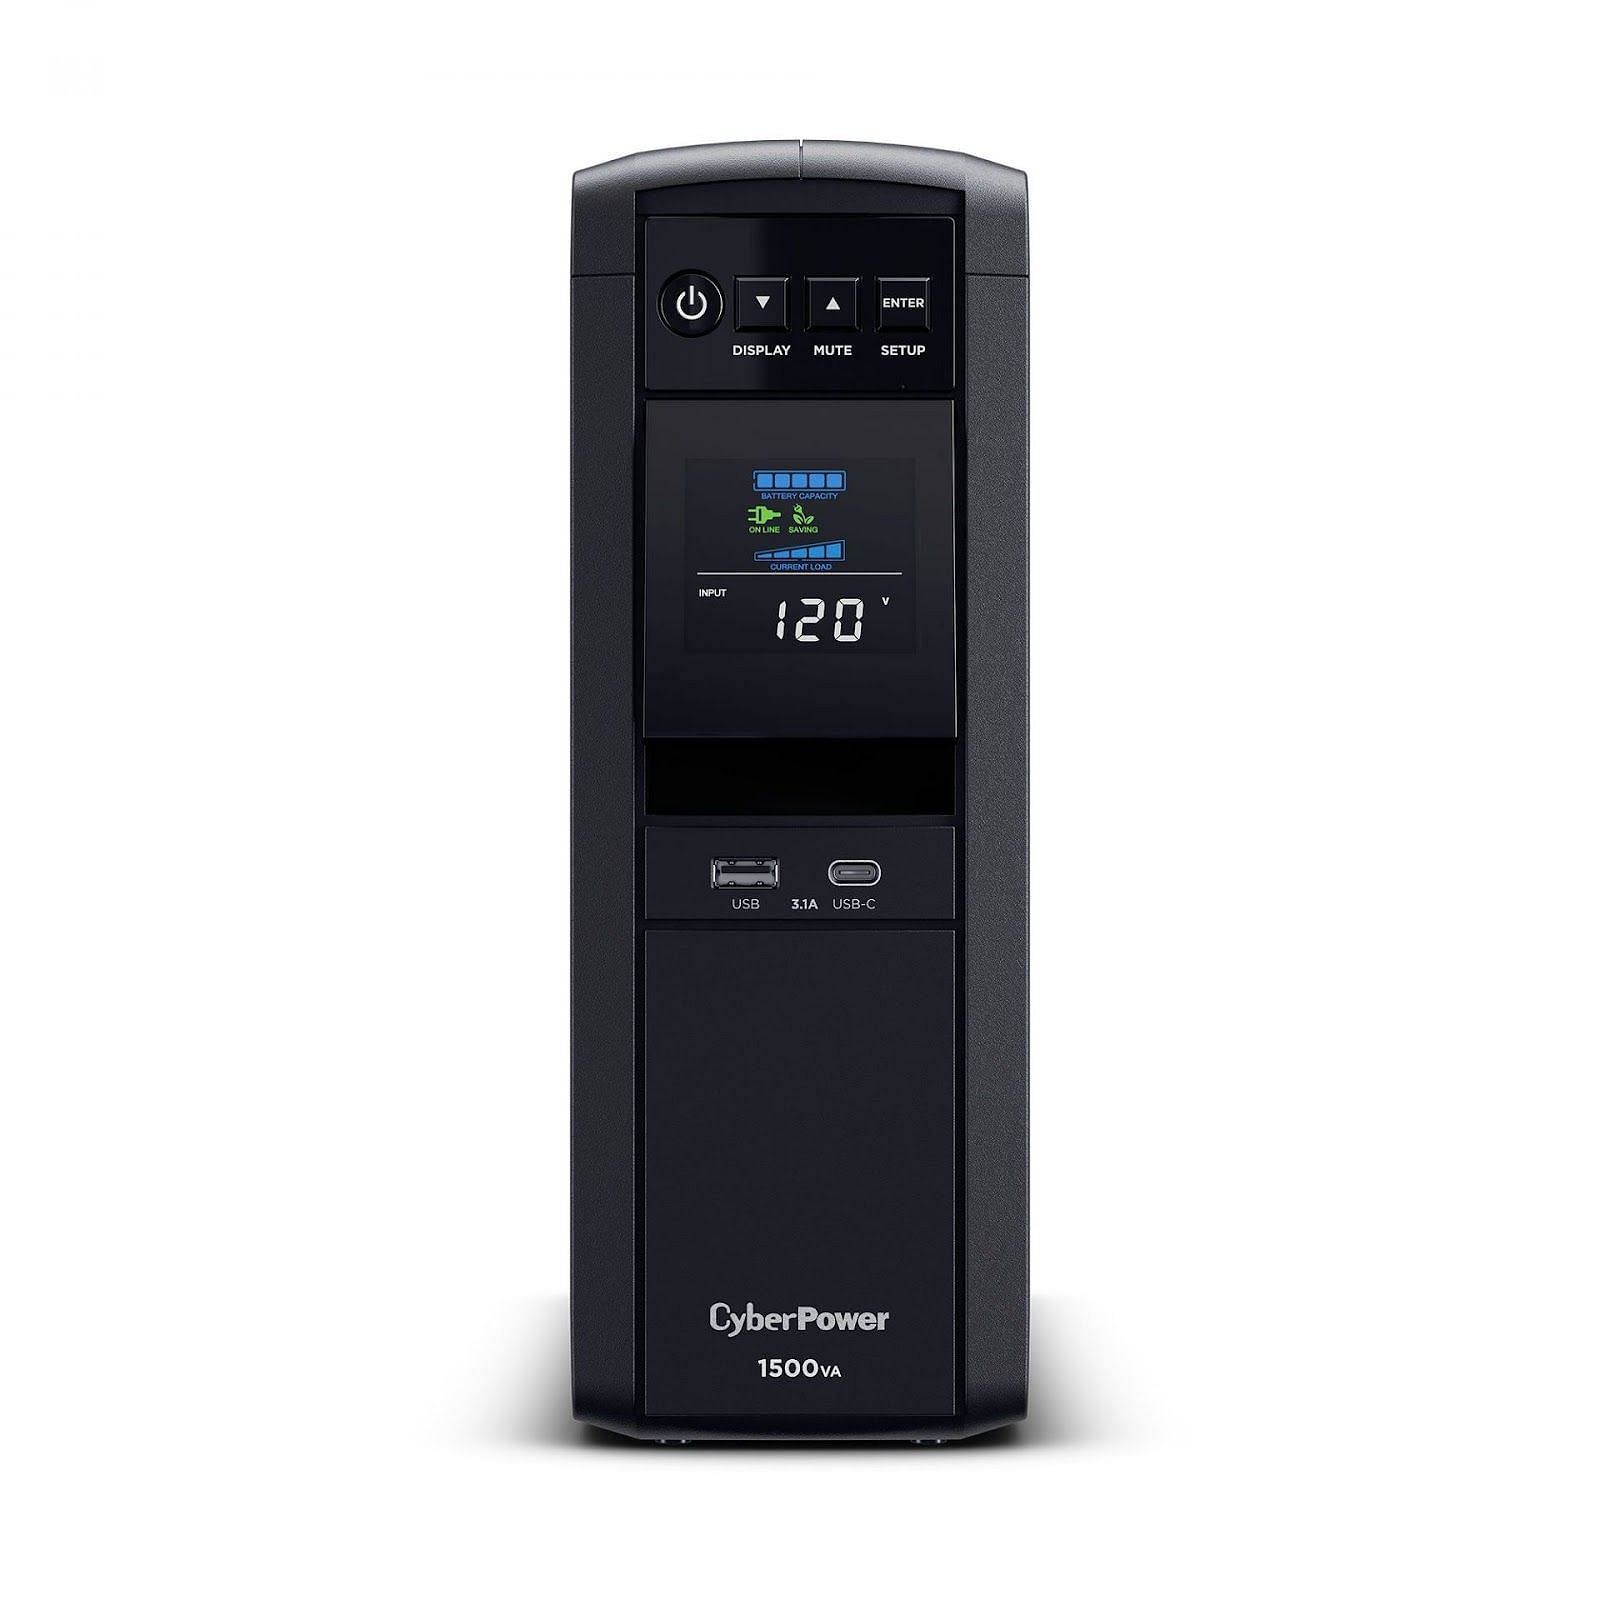 CyberPower CP1500PFCLCD (Image via CyberPower)